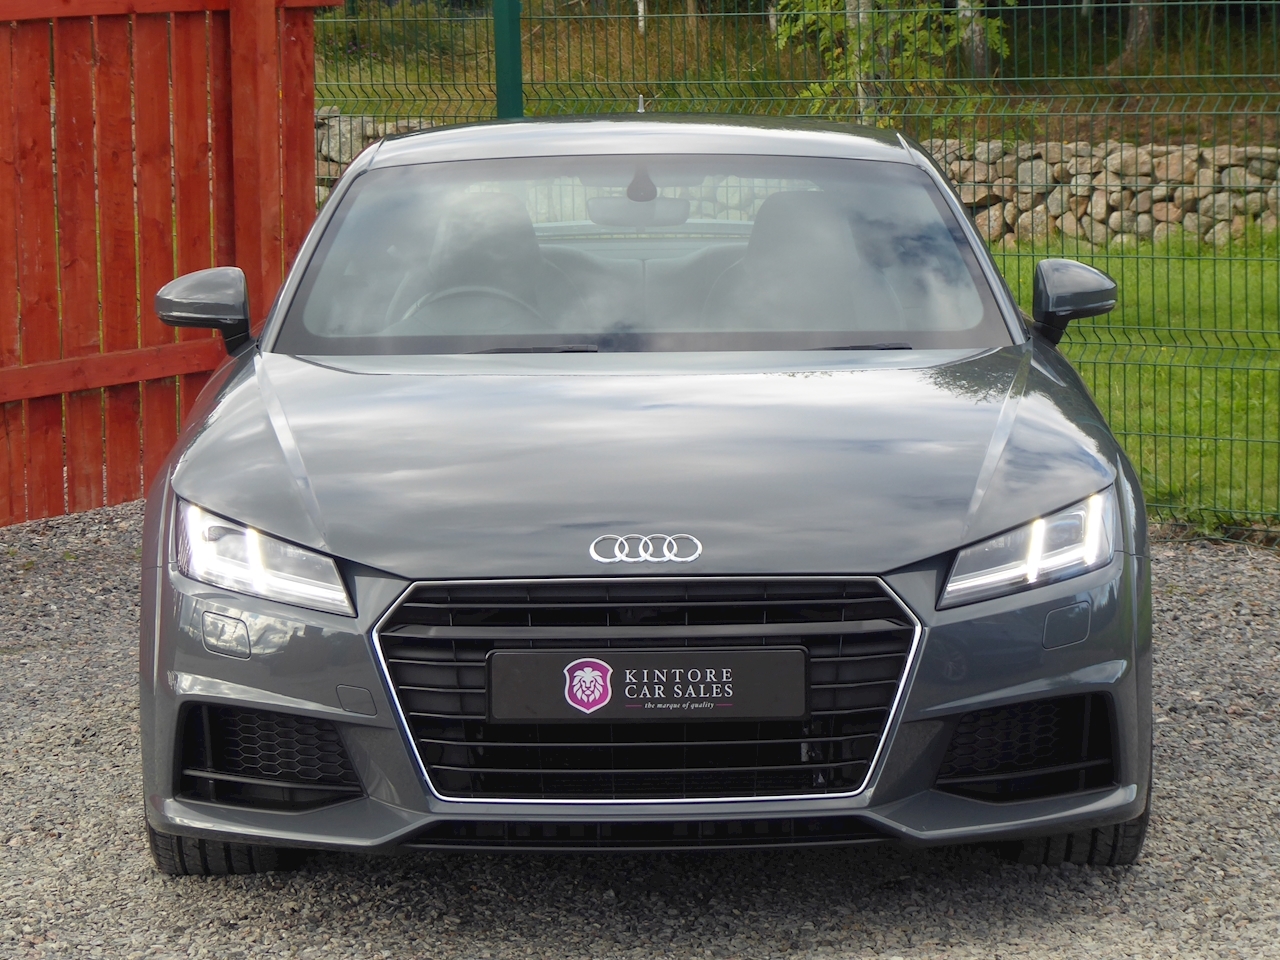 TT Ultra 2.0 S-line Coupe 2.0 3dr Coupe Manual Diesel